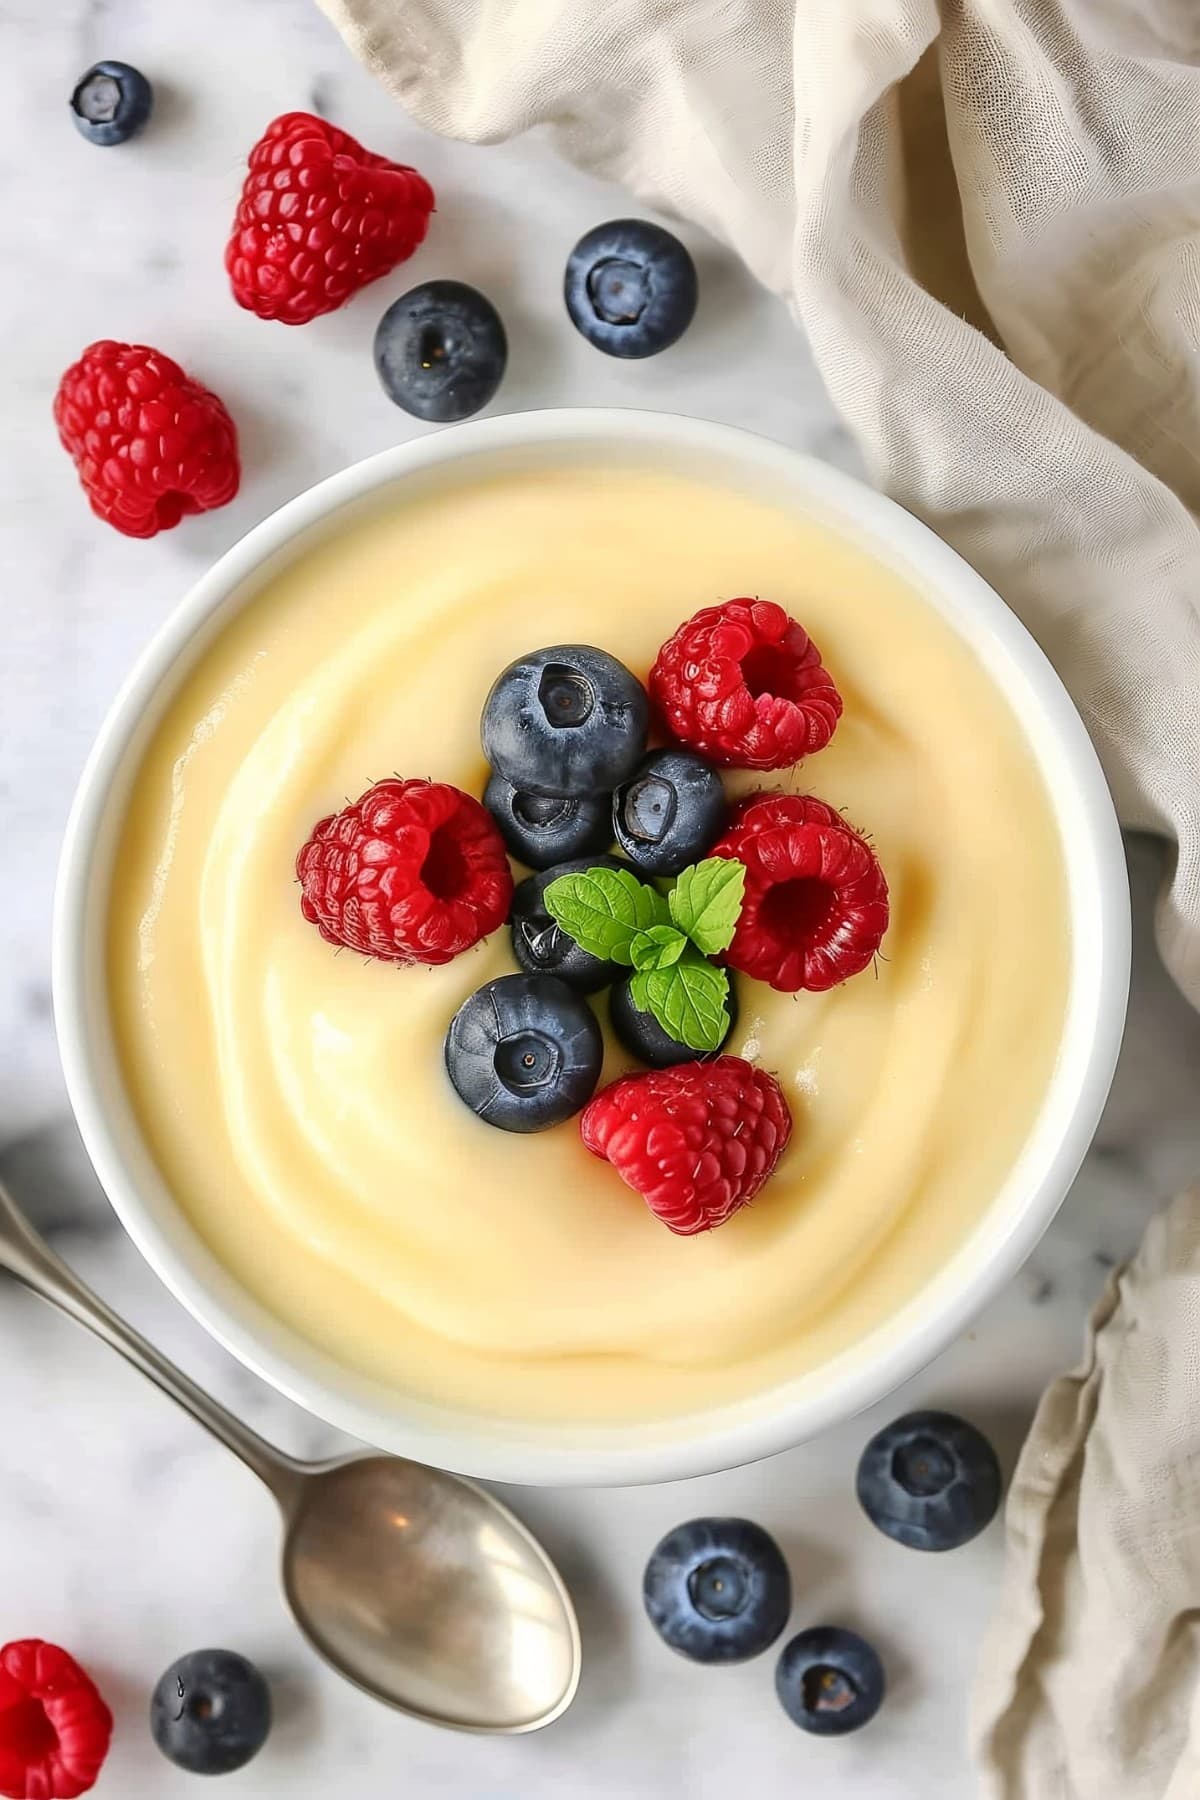 A decadent serving of classic vanilla custard, elegantly presented with raspberries and blueberries.